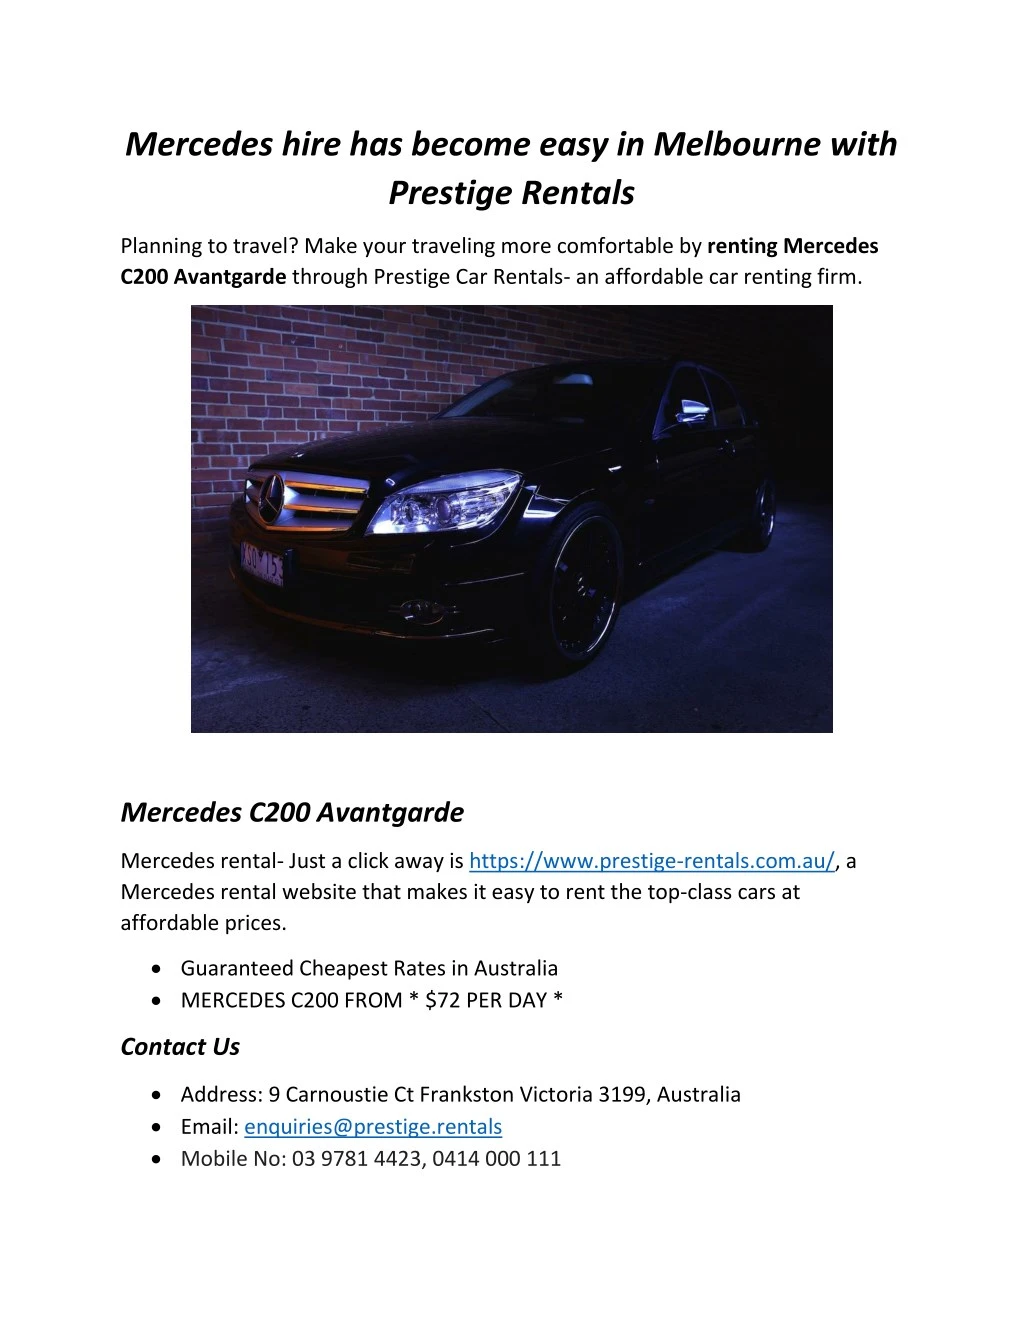 mercedes hire has become easy in melbourne with